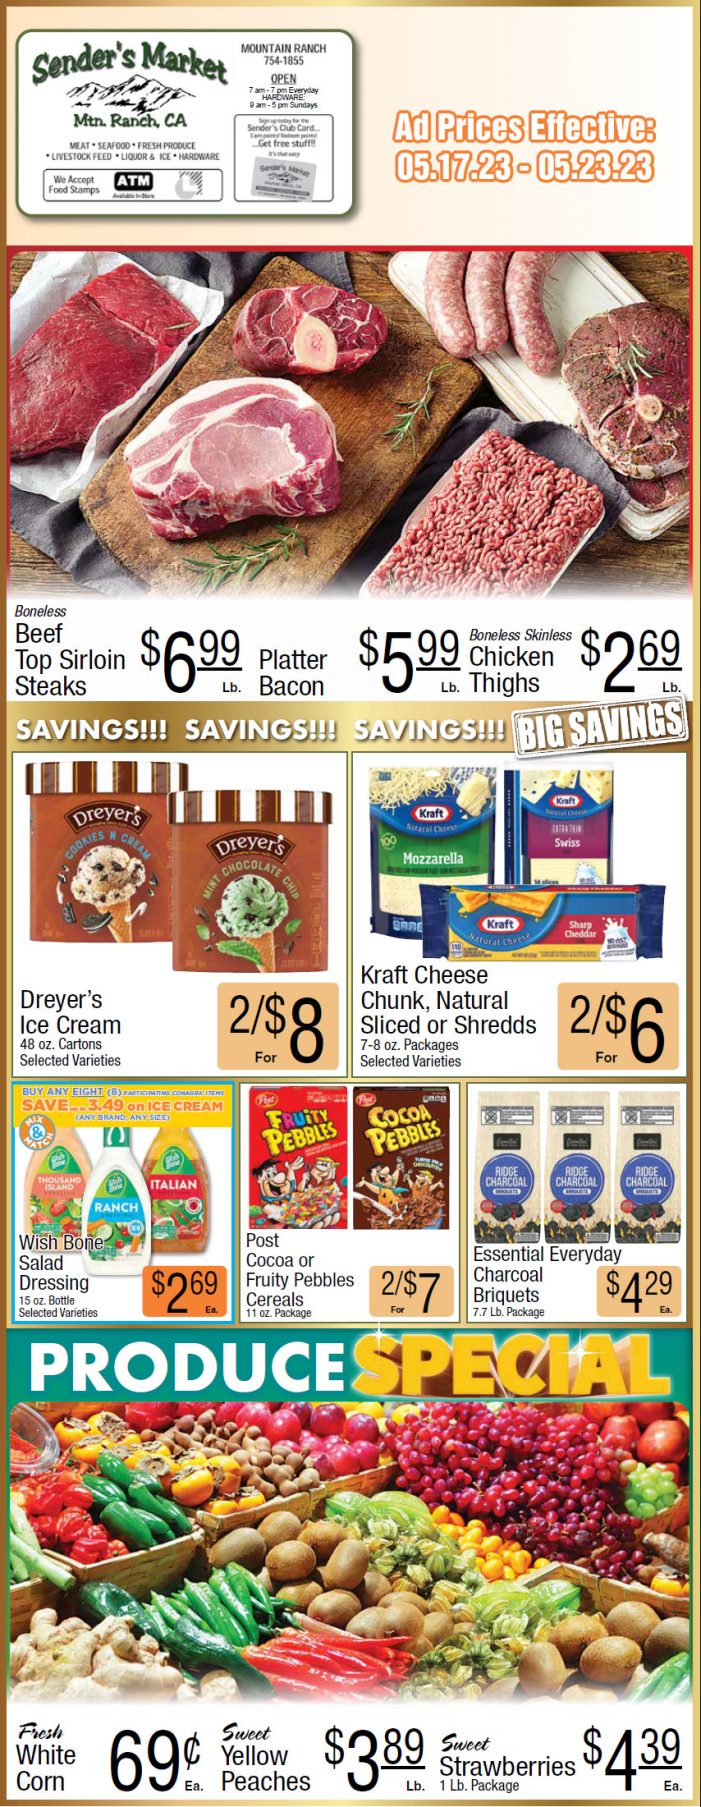 Sender’s Market Weekly Ad & Grocery Specials Through May 23rd! Shop Local & Save!!